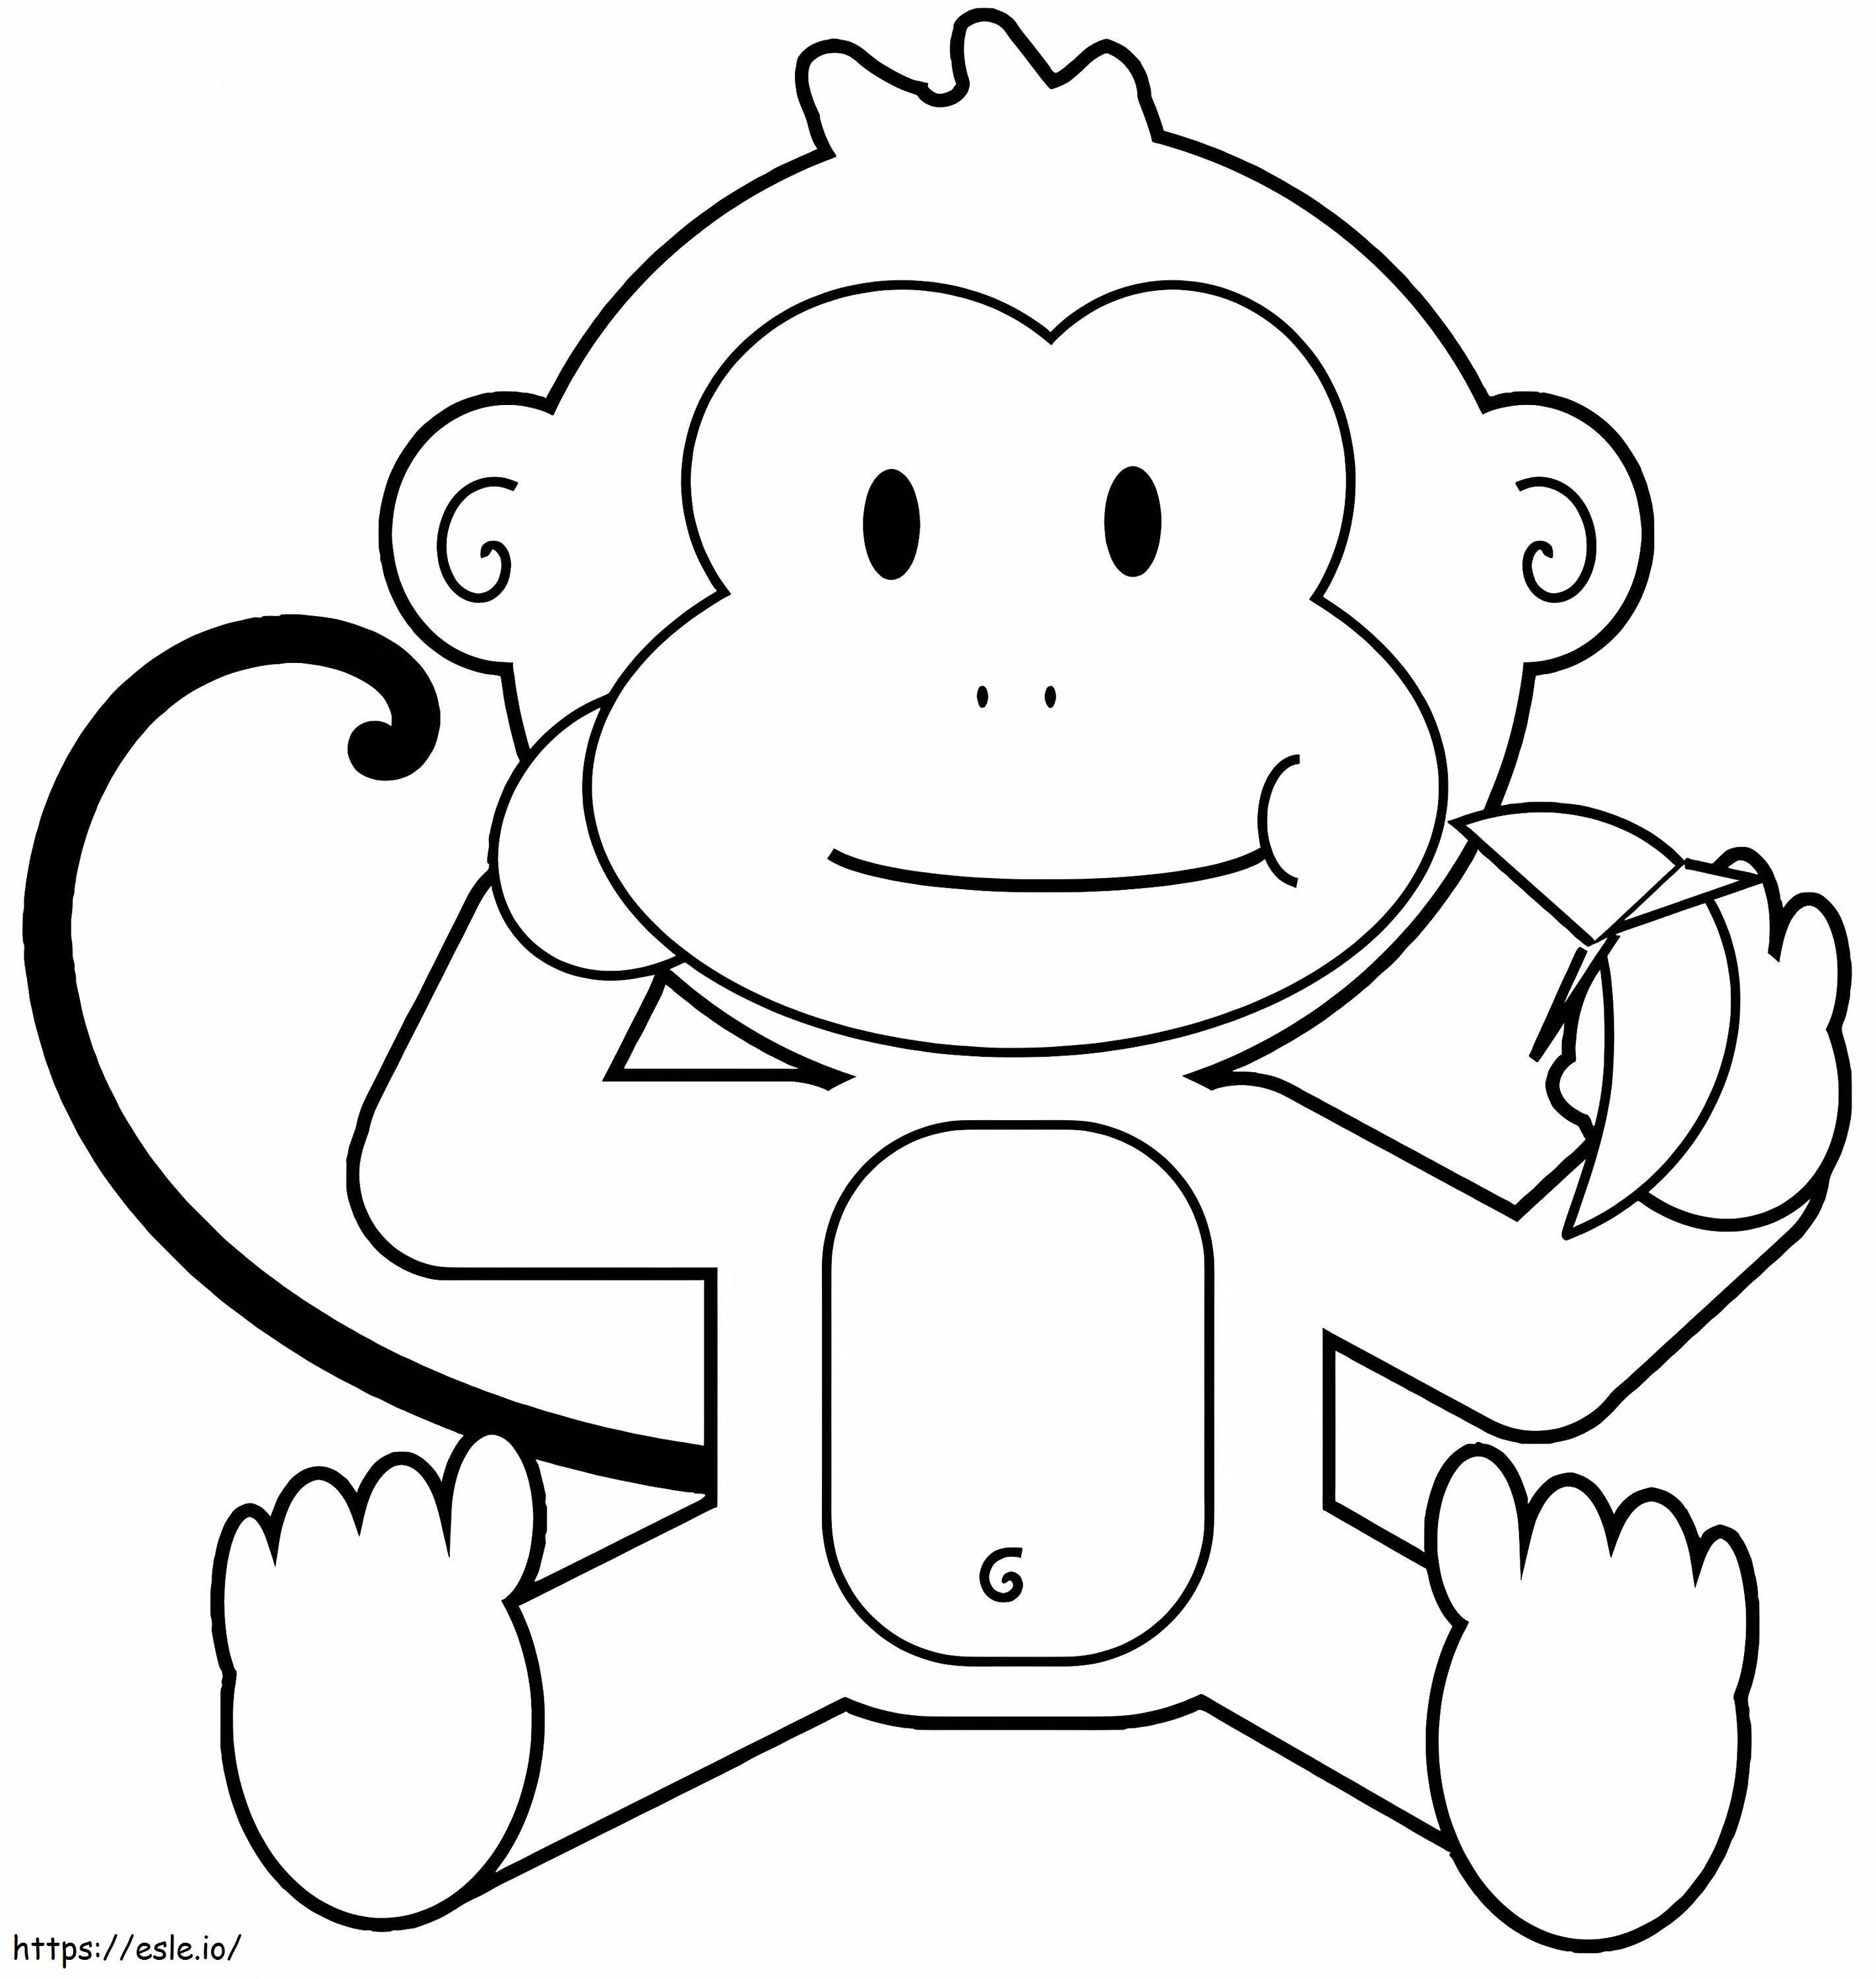 Animated Monkey coloring page